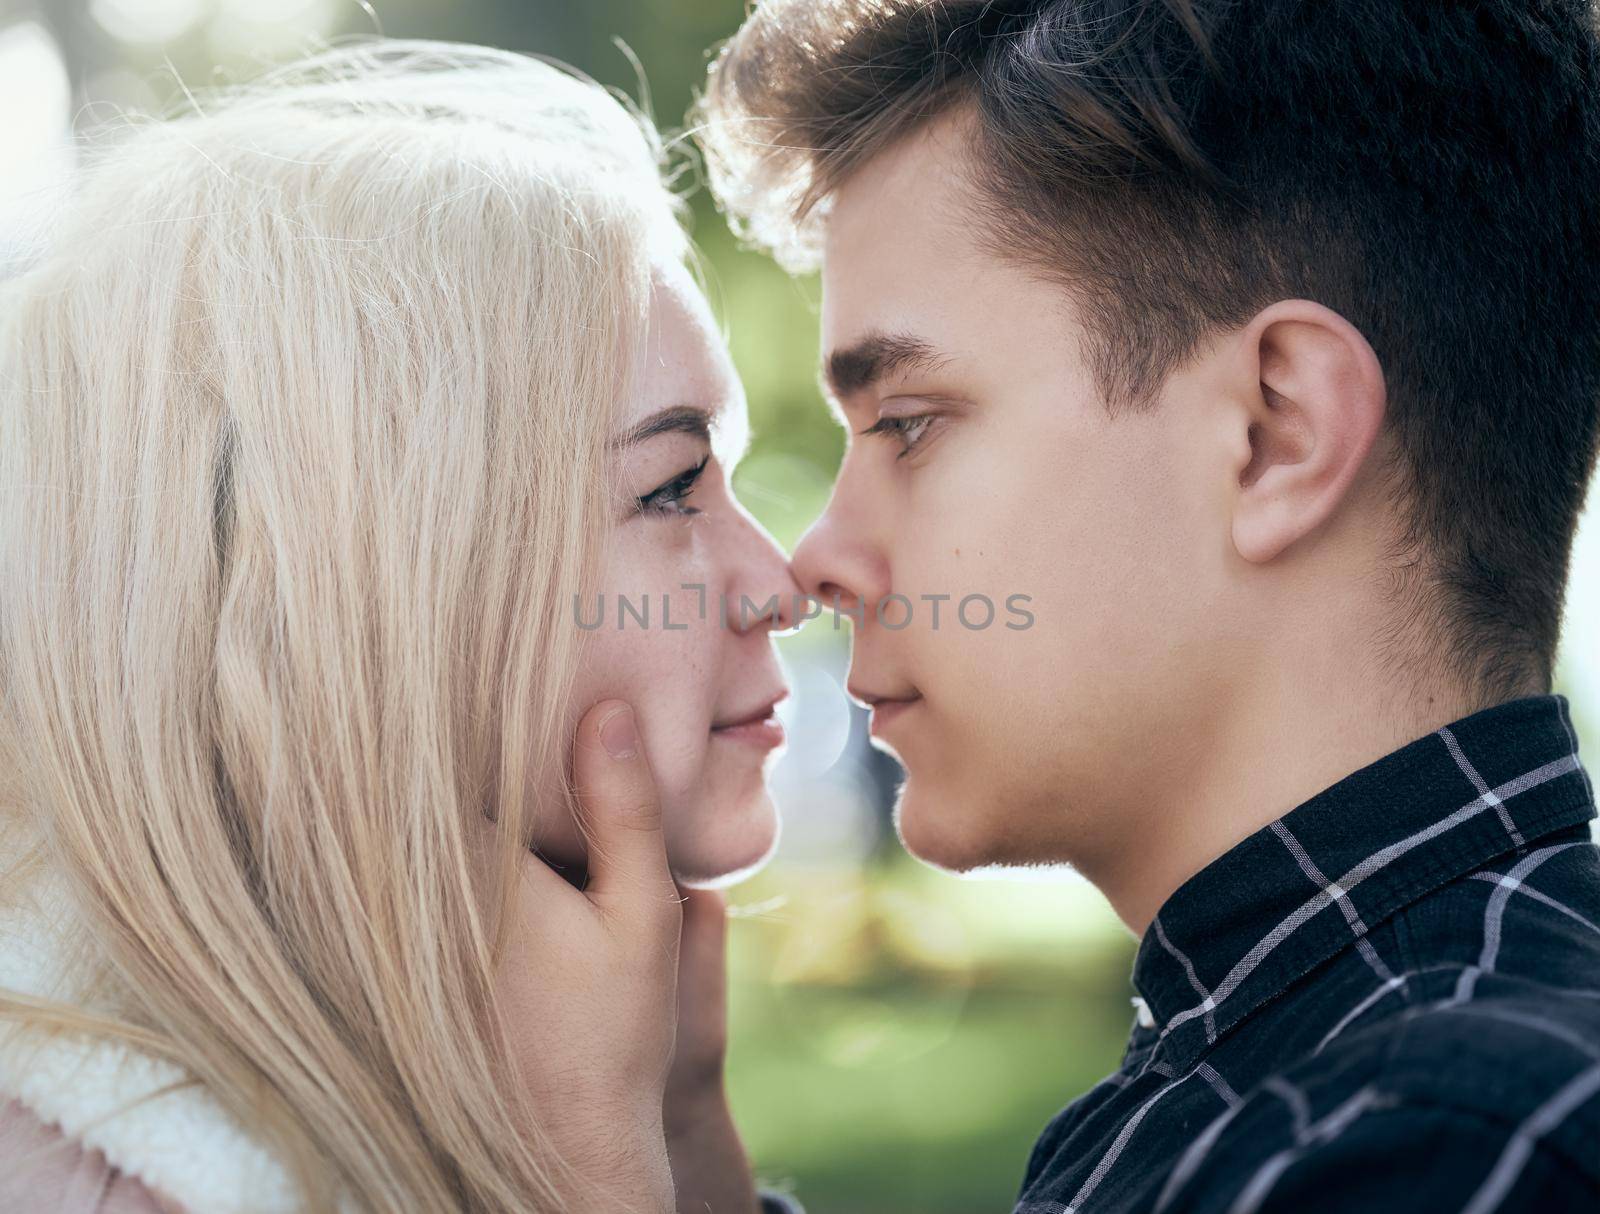 A man affectionately call looks at woman, guy and girl are worth close, touching the tips noses. Concept of teenage love and first kiss, close up